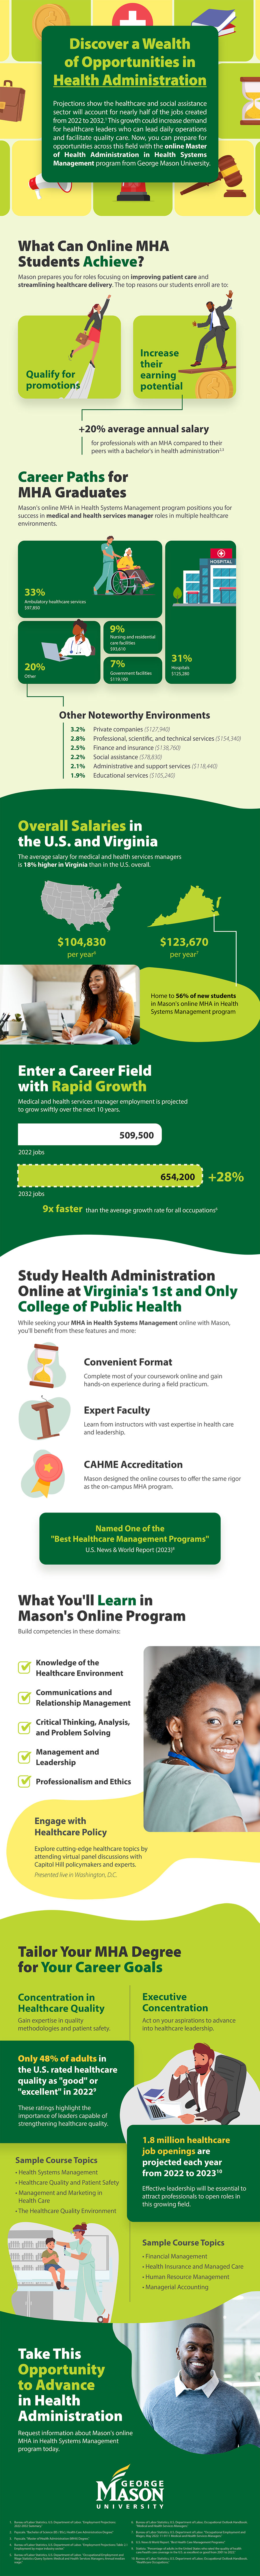 Discover a Wealth of Opportunities in Health Administration